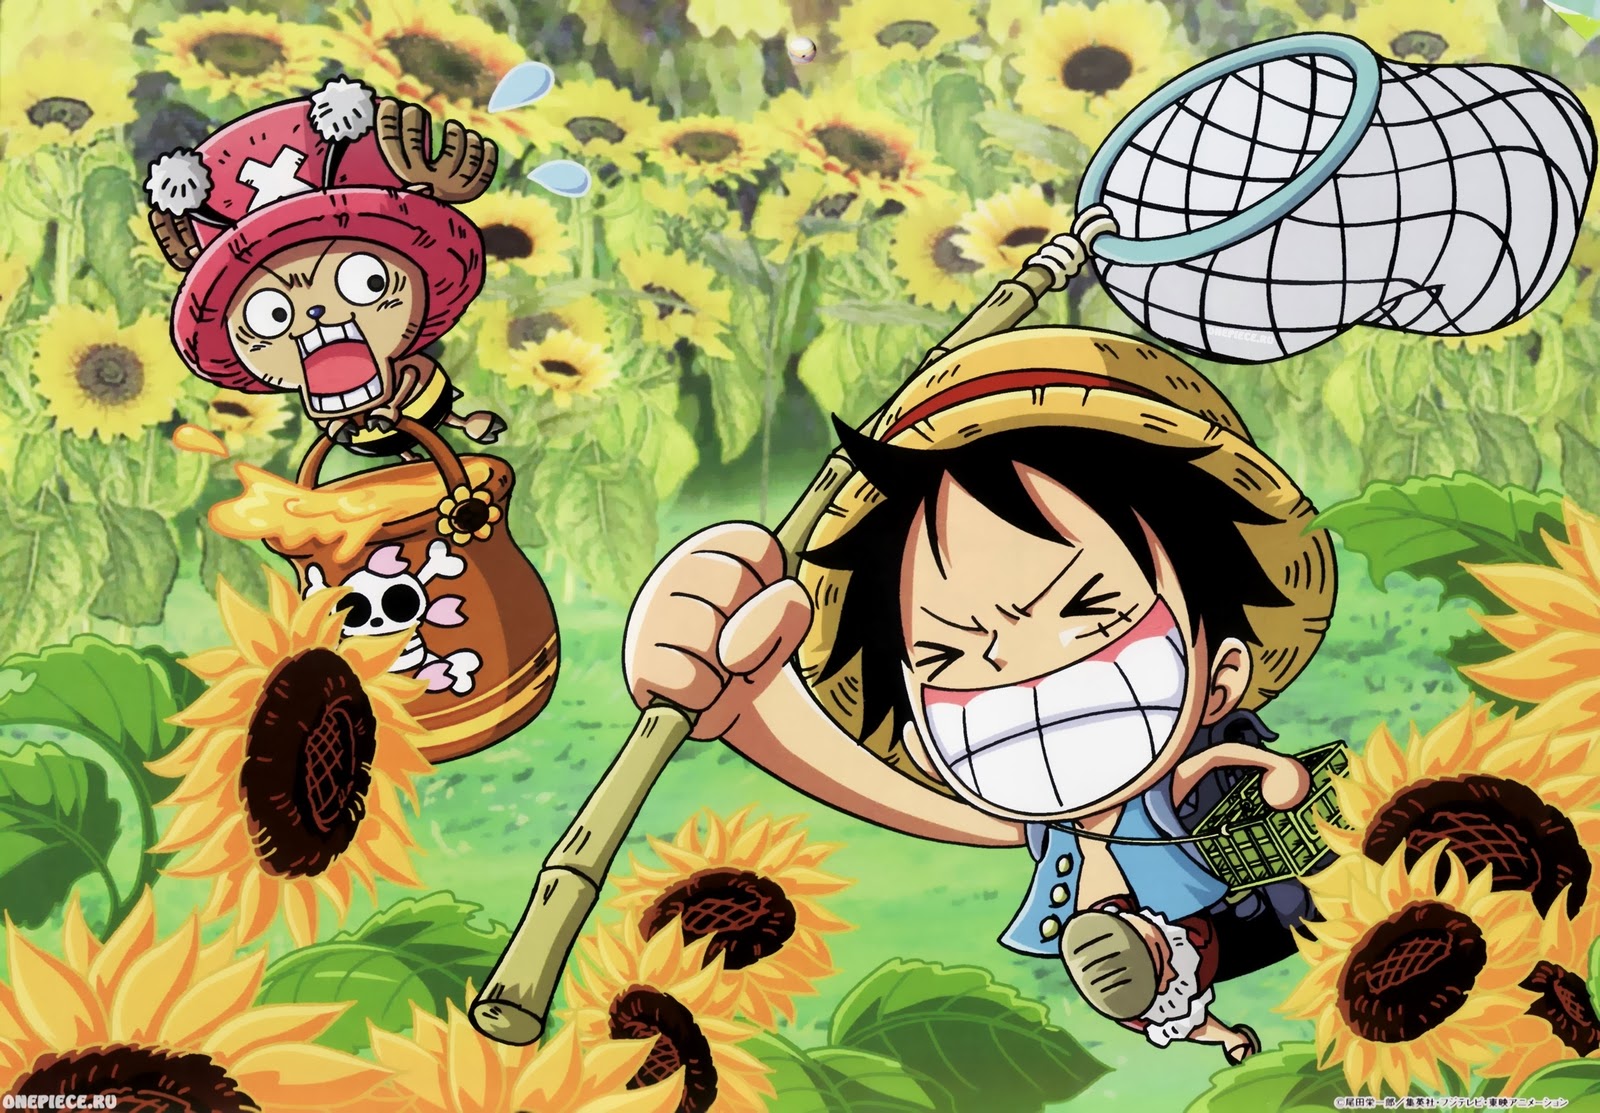 One Piece Luffy Wallpaper Free Anime Re-Upload